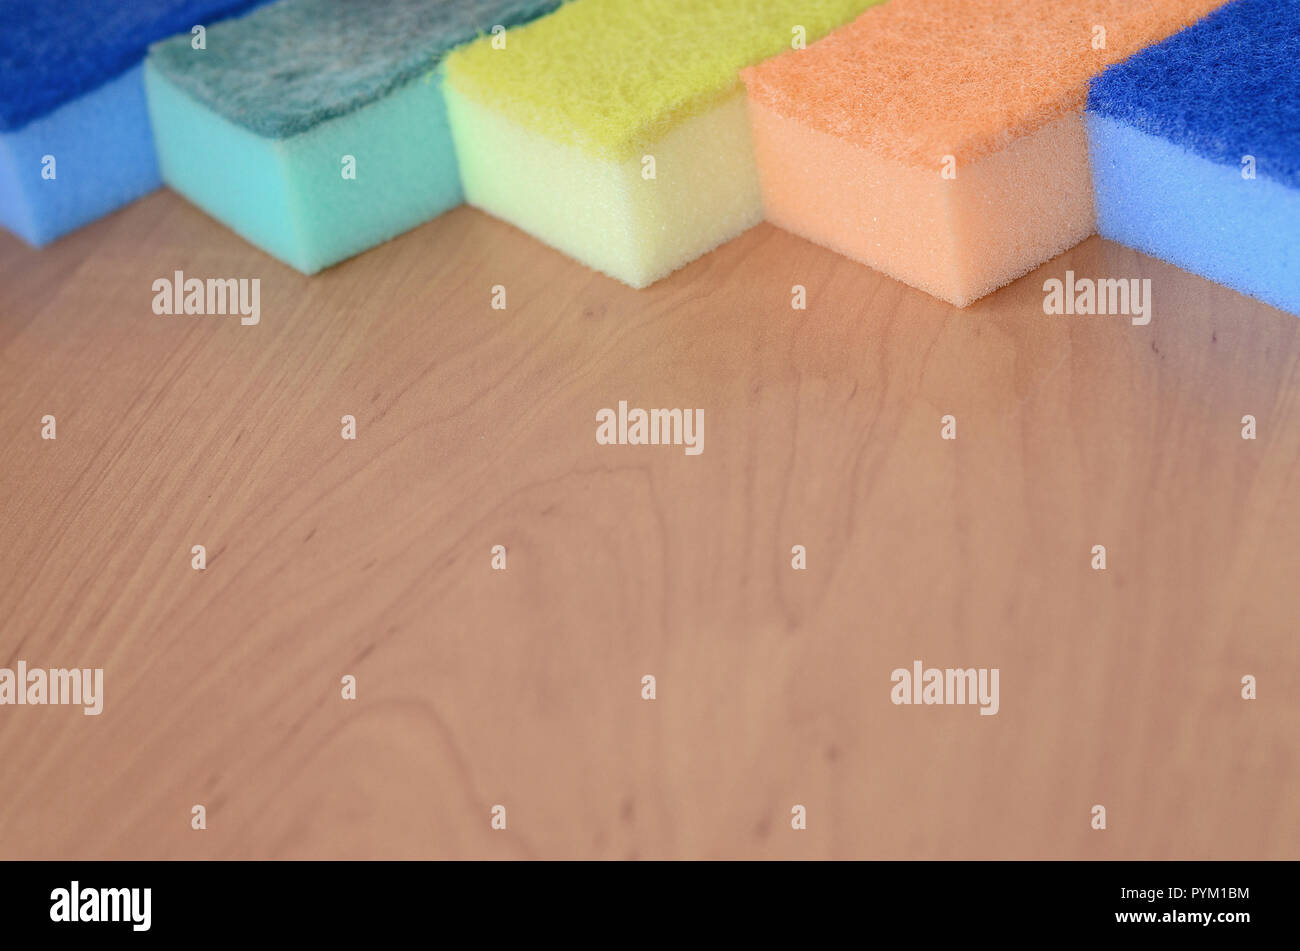 https://c8.alamy.com/comp/PYM1BM/a-few-kitchen-sponges-lie-on-a-wooden-kitchen-countertop-colorful-objects-for-washing-dishes-and-cleaning-in-the-house-are-ready-for-use-PYM1BM.jpg